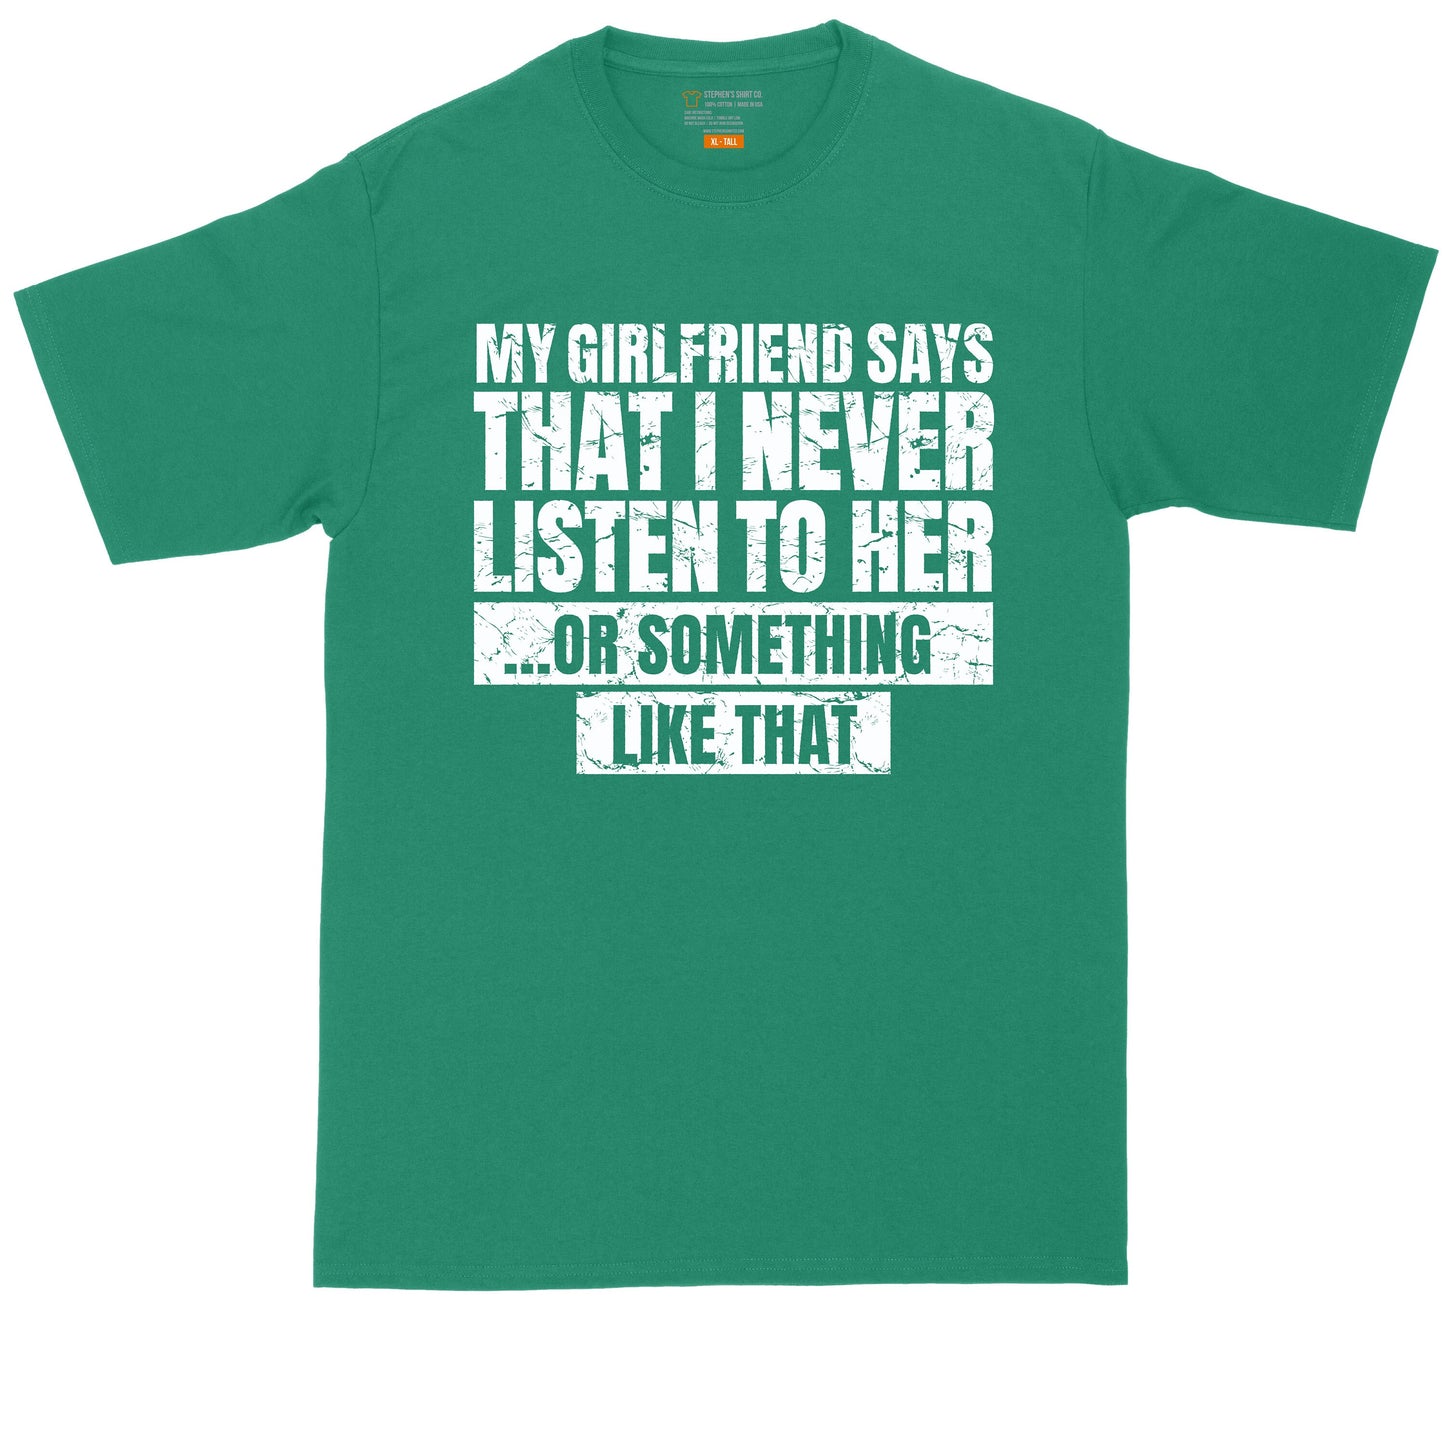 My Girlfriend Says I Never Listen to Her | Big and Tall Men | Funny Shirt | Sarcastic Shirt | Big Guy Shirt